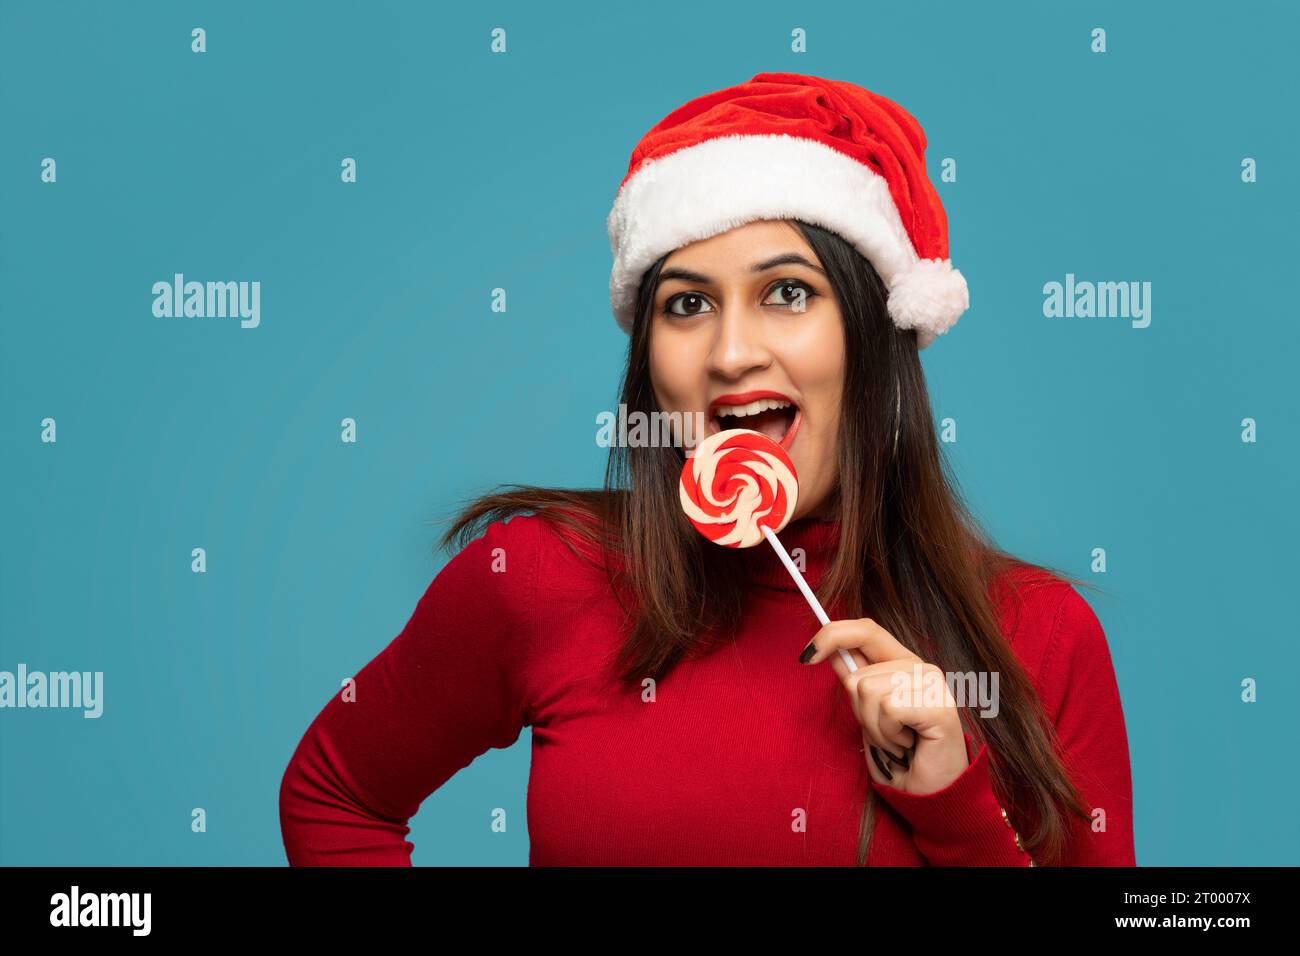 Young woman eating a lollipop on a blue background Stock Photo